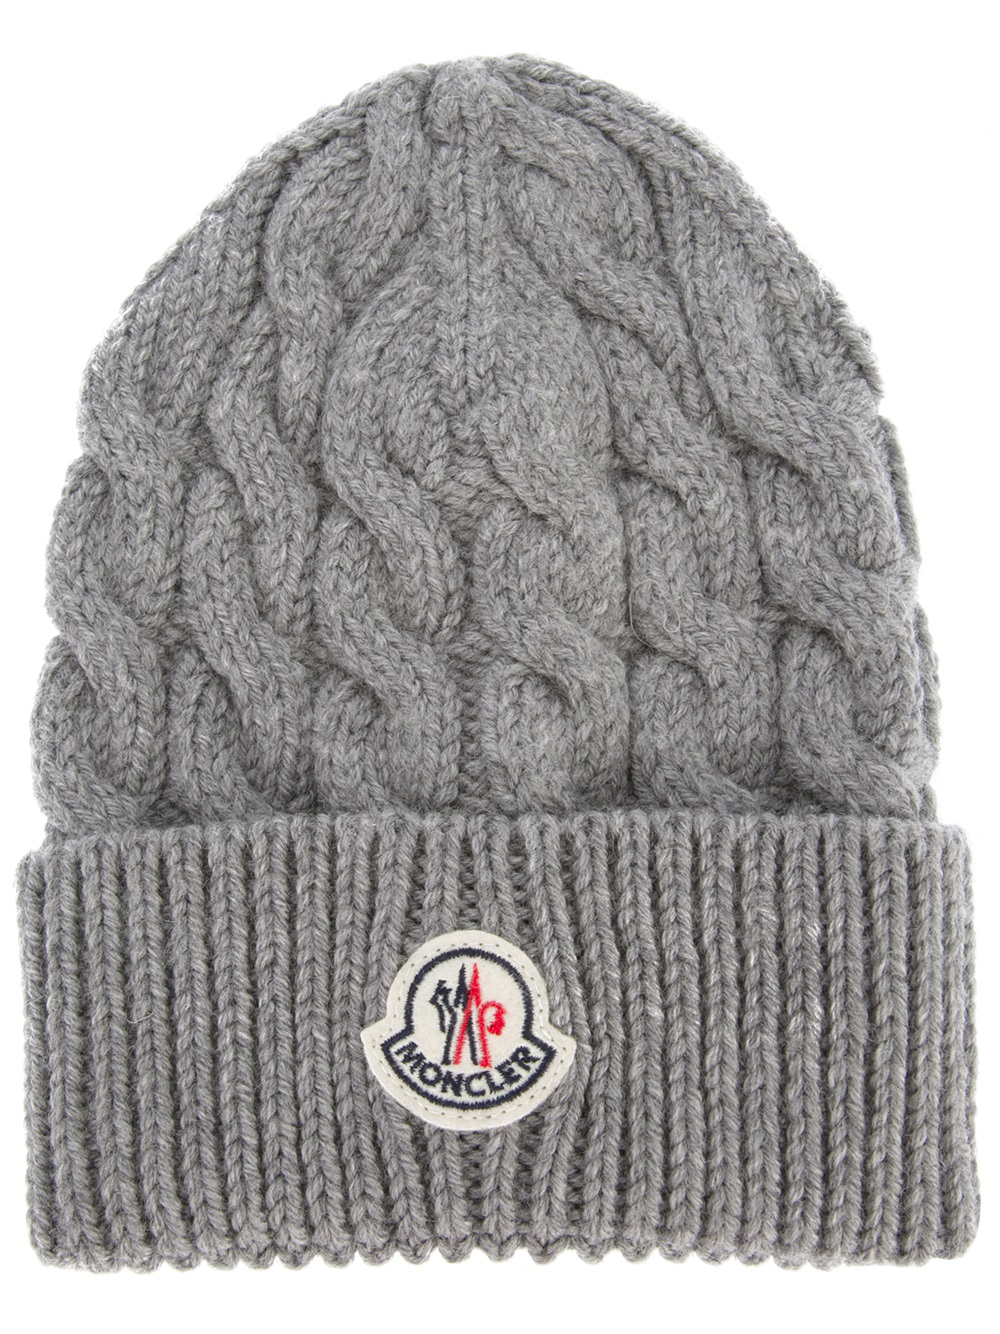 Moncler Cable Knit Beanie Hat in Grey (Gray) for Men - Lyst